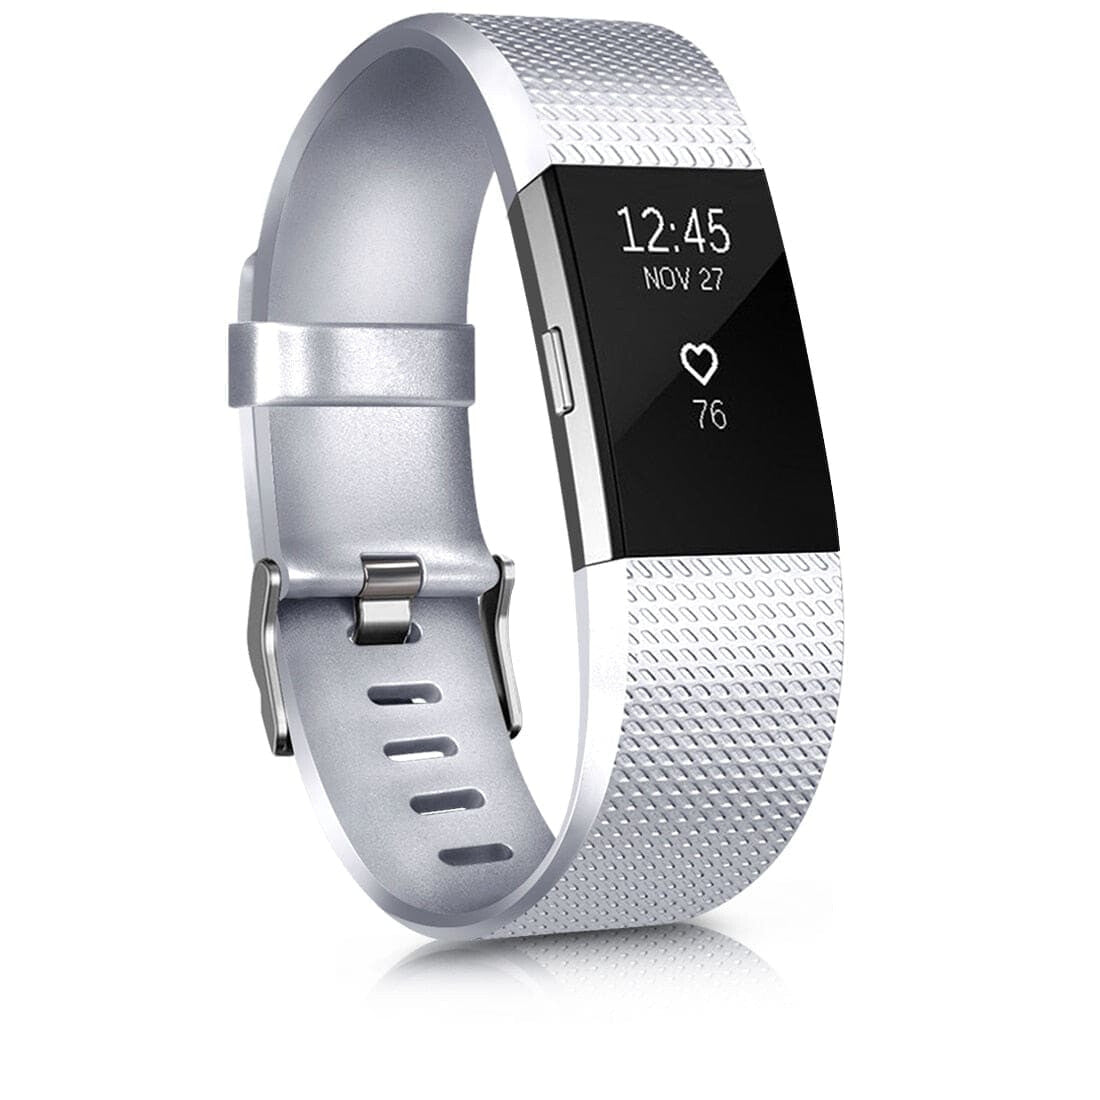 Silikon Armband für Fitbit Charge 2 - Silber / S - Fitbit Armband